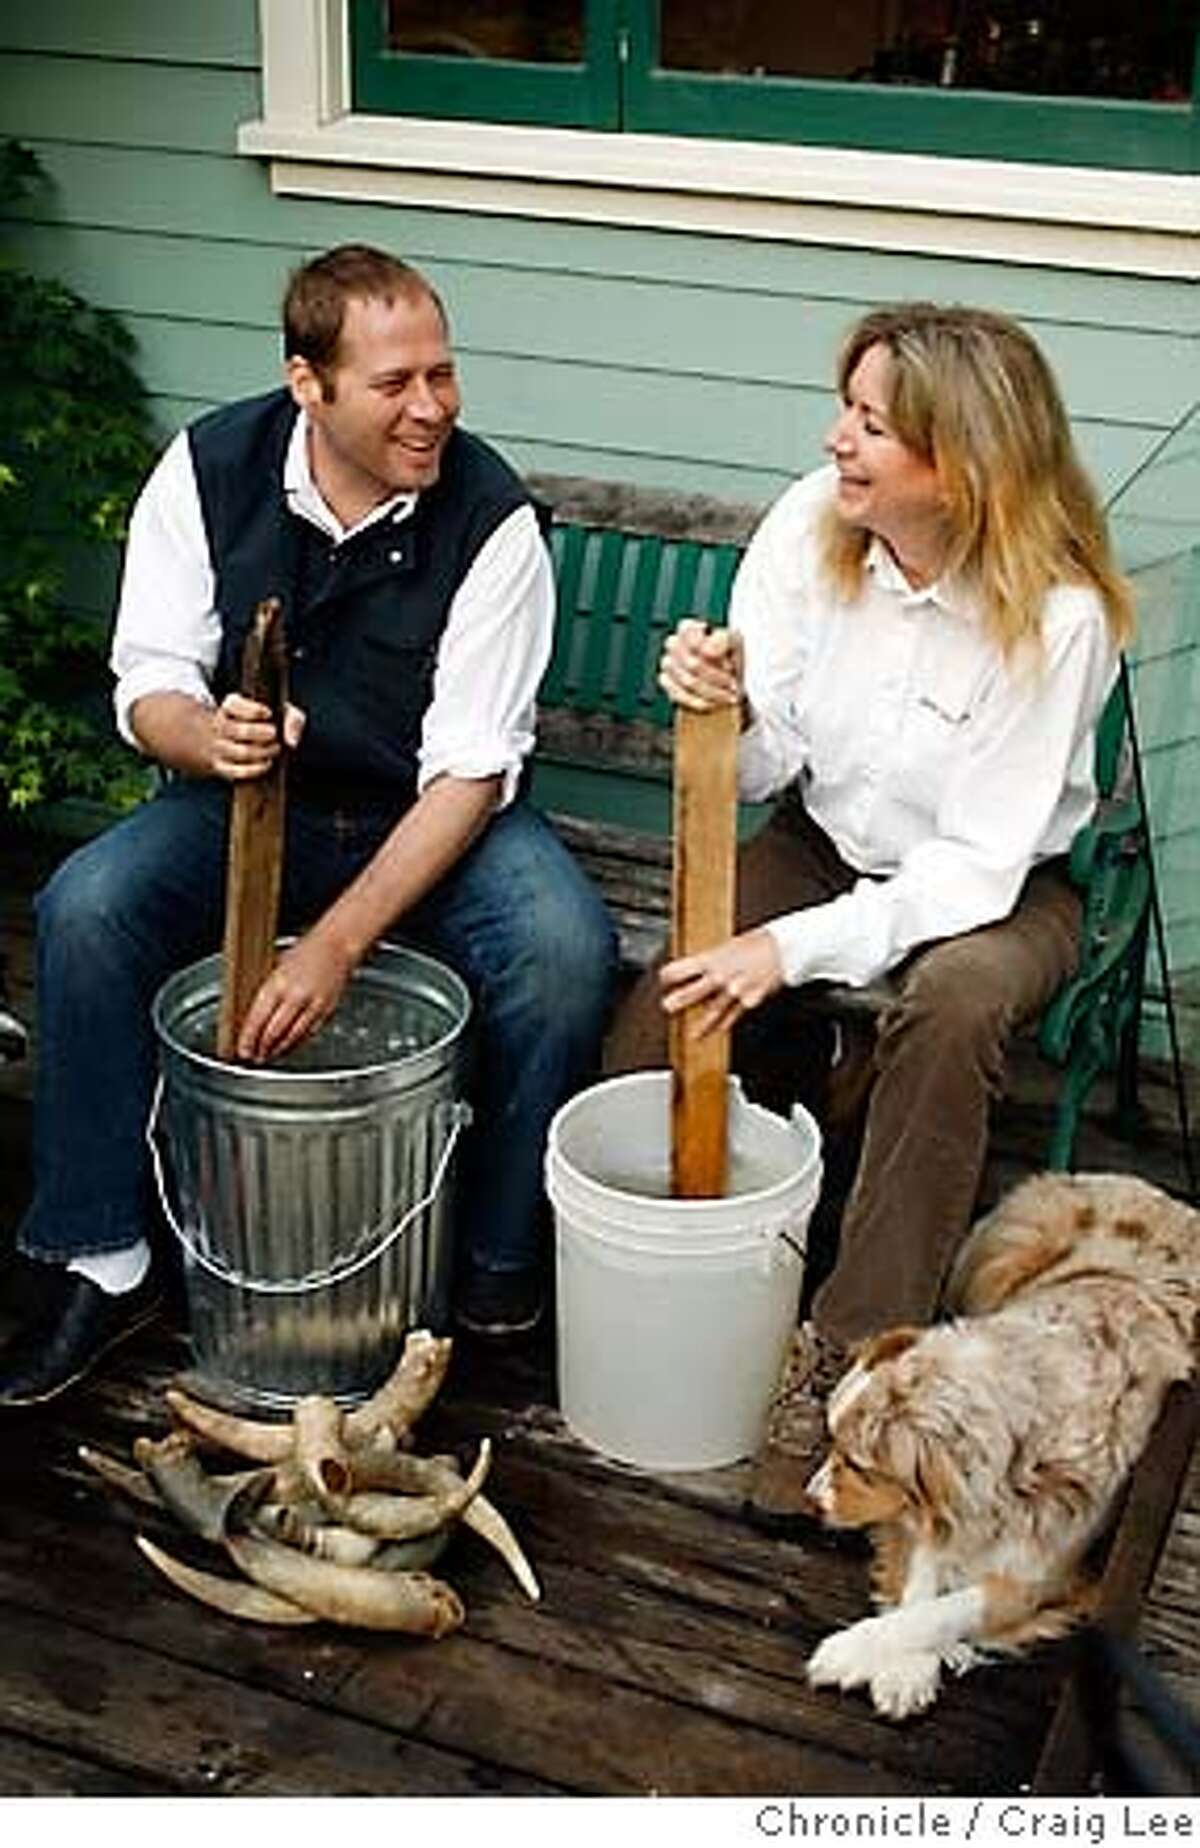 BIODYNAMIC16_046_cl.JPG Story on chefs who have their own biodynamic farms to supply their restaurant. This is David Kinch, chef at Manresa in Los Gatos. David and his farmer, Cynthia Sandberg of Love Apple Farm in Ben Lomond, apply a biodynamic preparation to the crops. Photo of Cynthia Sandberg (right) and David Kinch (left) stirring rain water captured in buckets to make the biodynamic preparation. Cynthia's dog, Indy, is on the right. Event on 4/27/07 in Ben Lomond. photo by Craig Lee / The Chronicle MANDATORY CREDIT FOR PHOTOG AND SF CHRONICLE/NO SALES-MAGS OUT